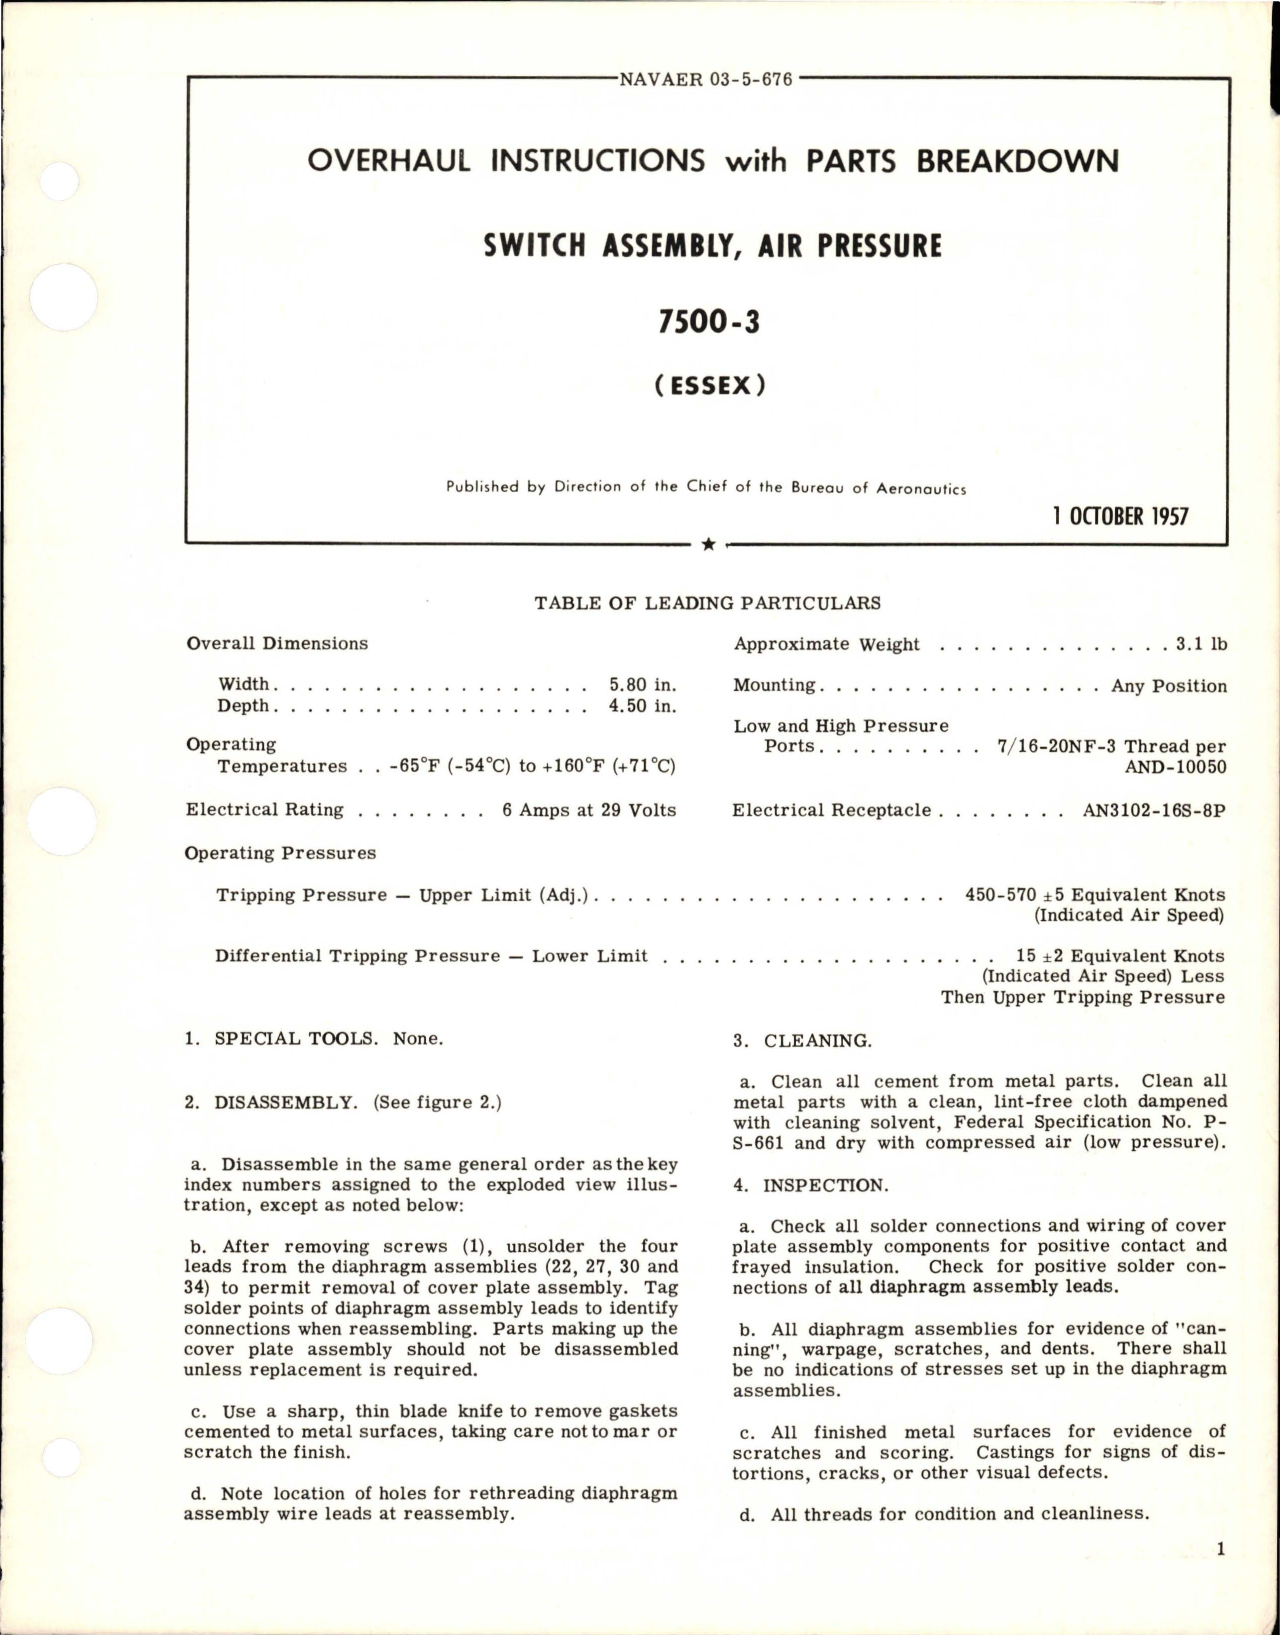 Sample page 1 from AirCorps Library document: Overhaul Instructions with Parts Breakdown for Air Pressure Switch Assembly - 7500-3